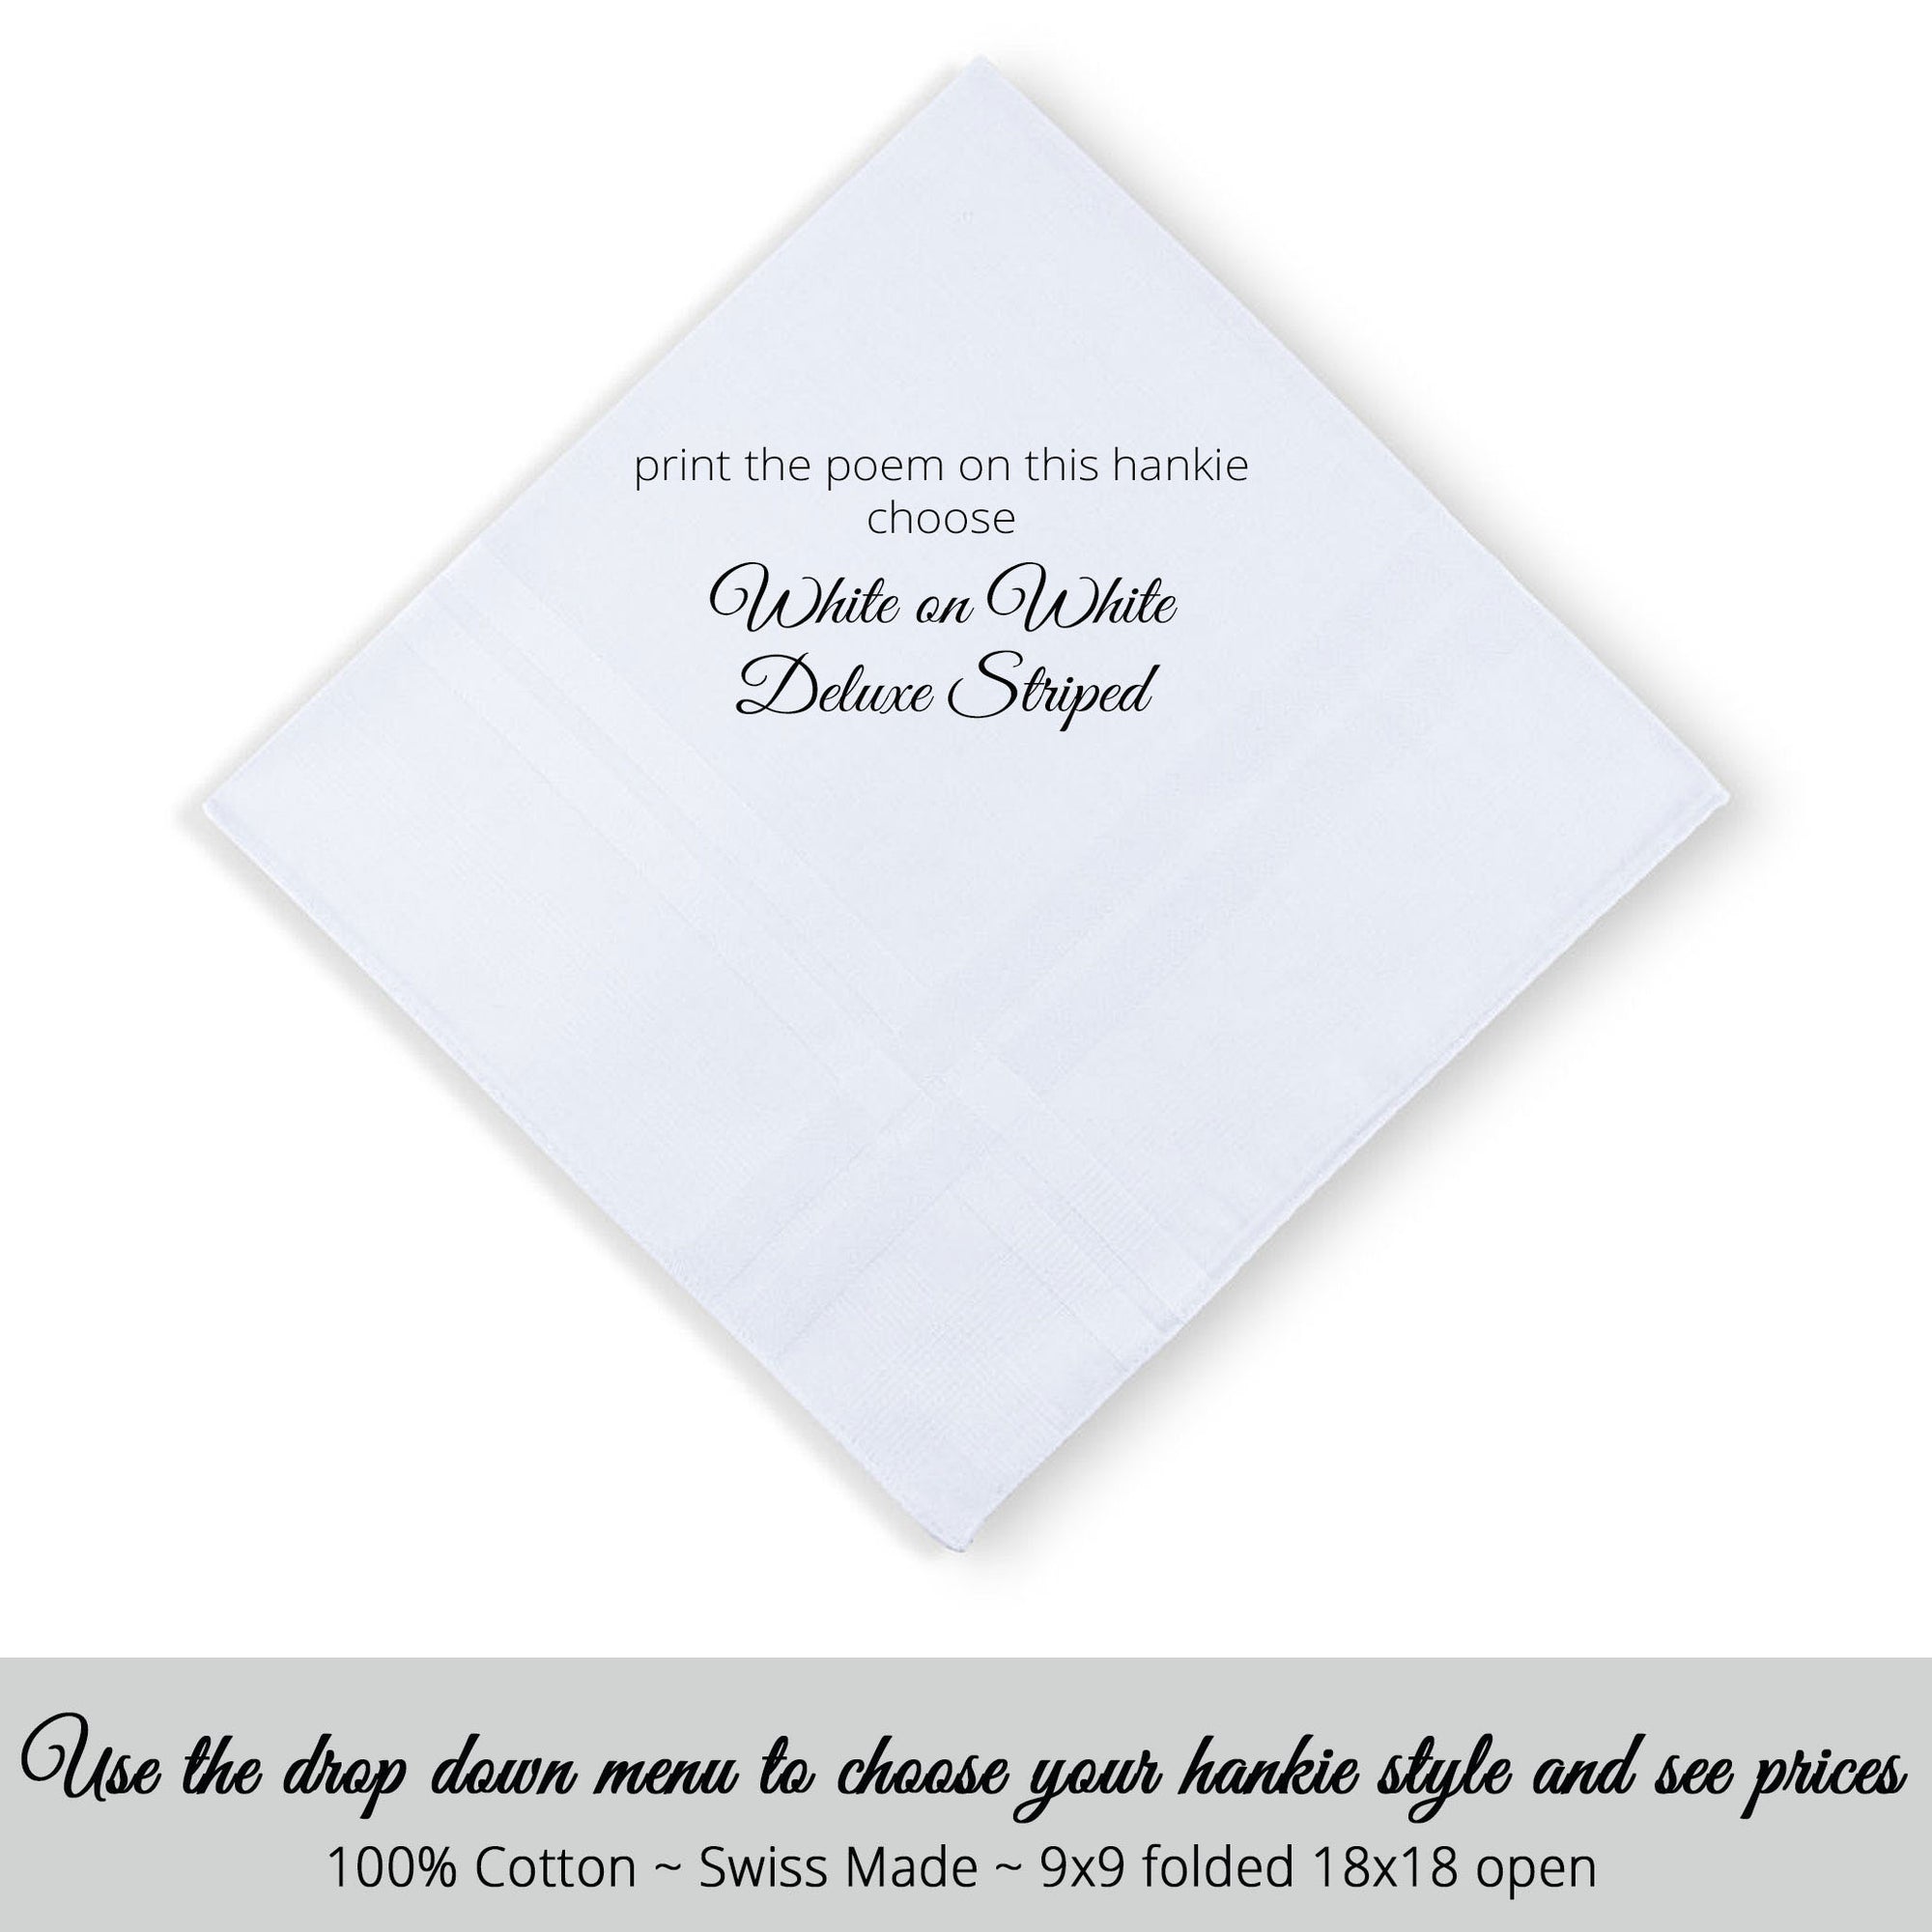 Swiss made man's handkerchief white on white deluxe striped for the stepfather of the bride